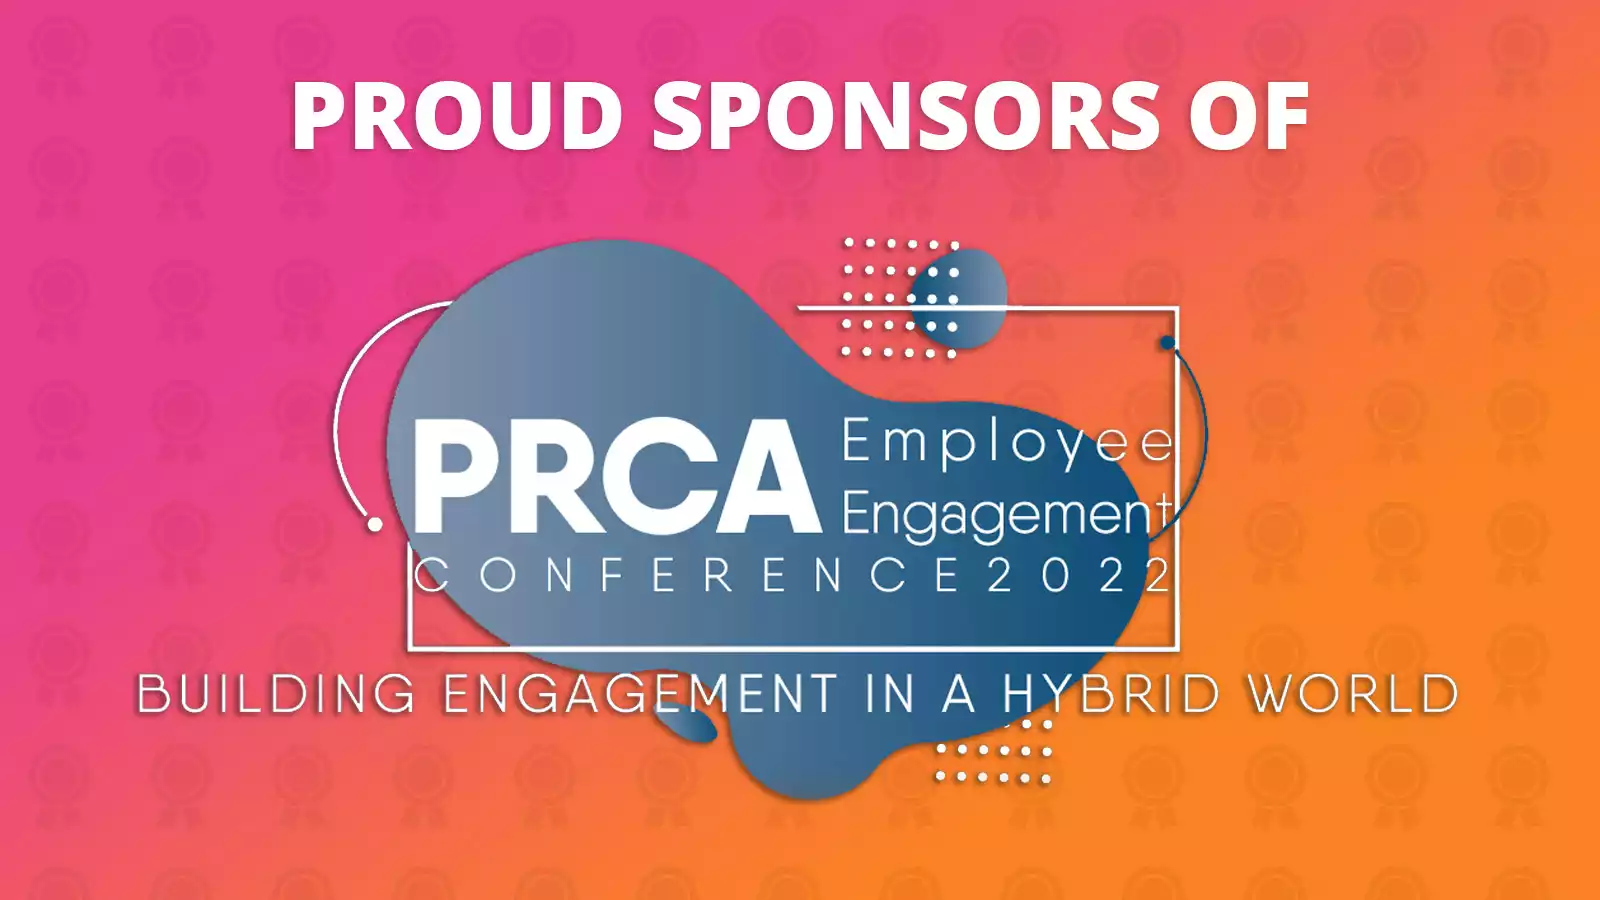 Proud sponsors of PRCA Employee Engagement Conference